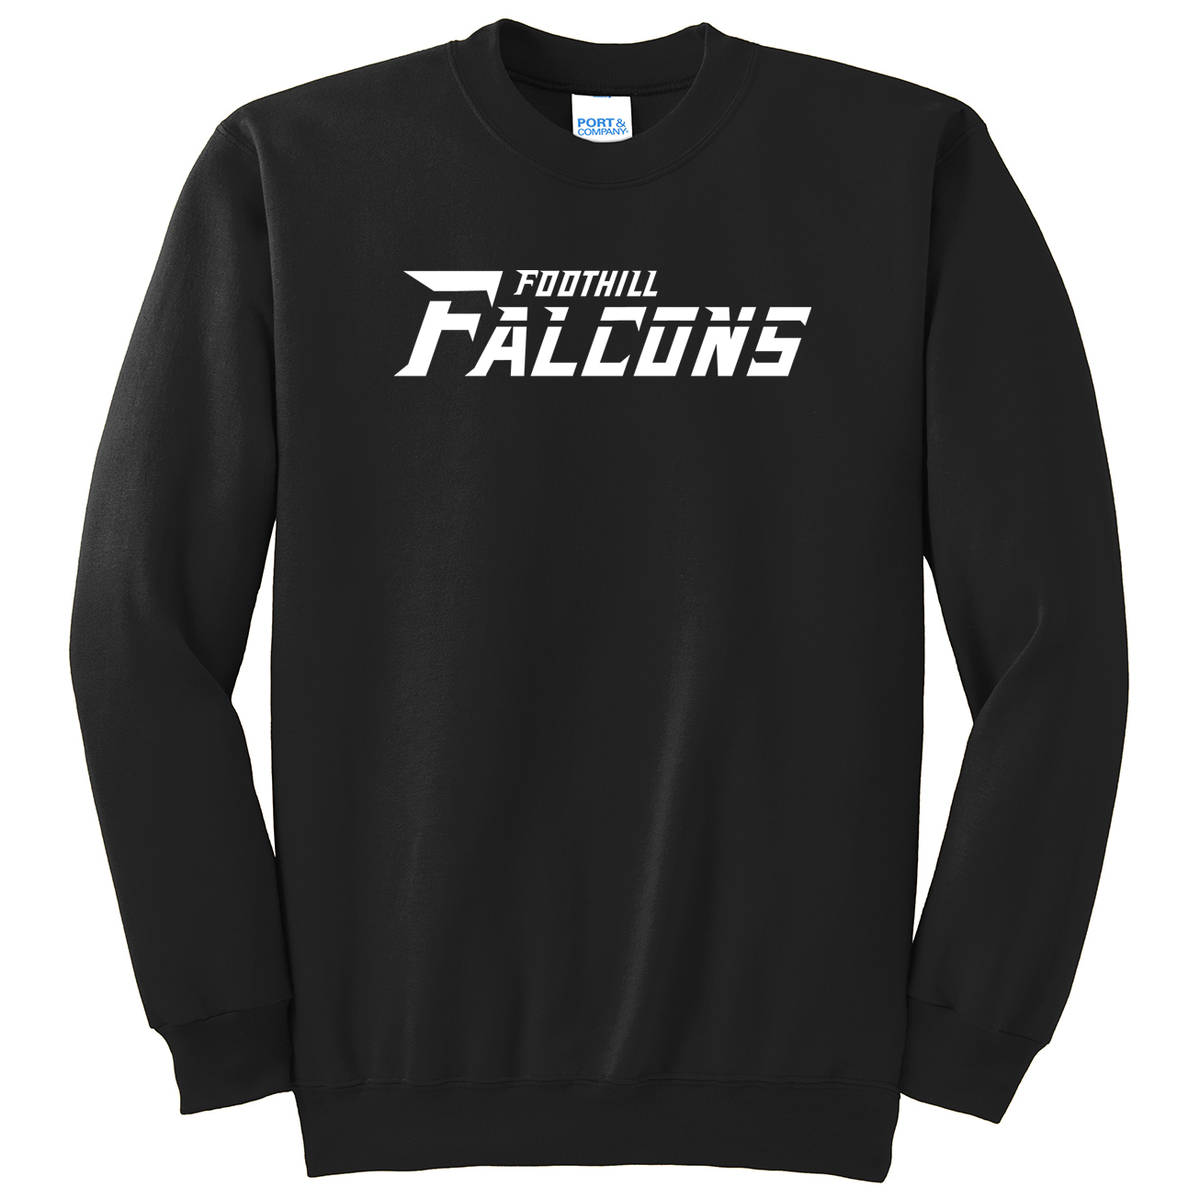 Foothill Falcons Crew Neck Sweater